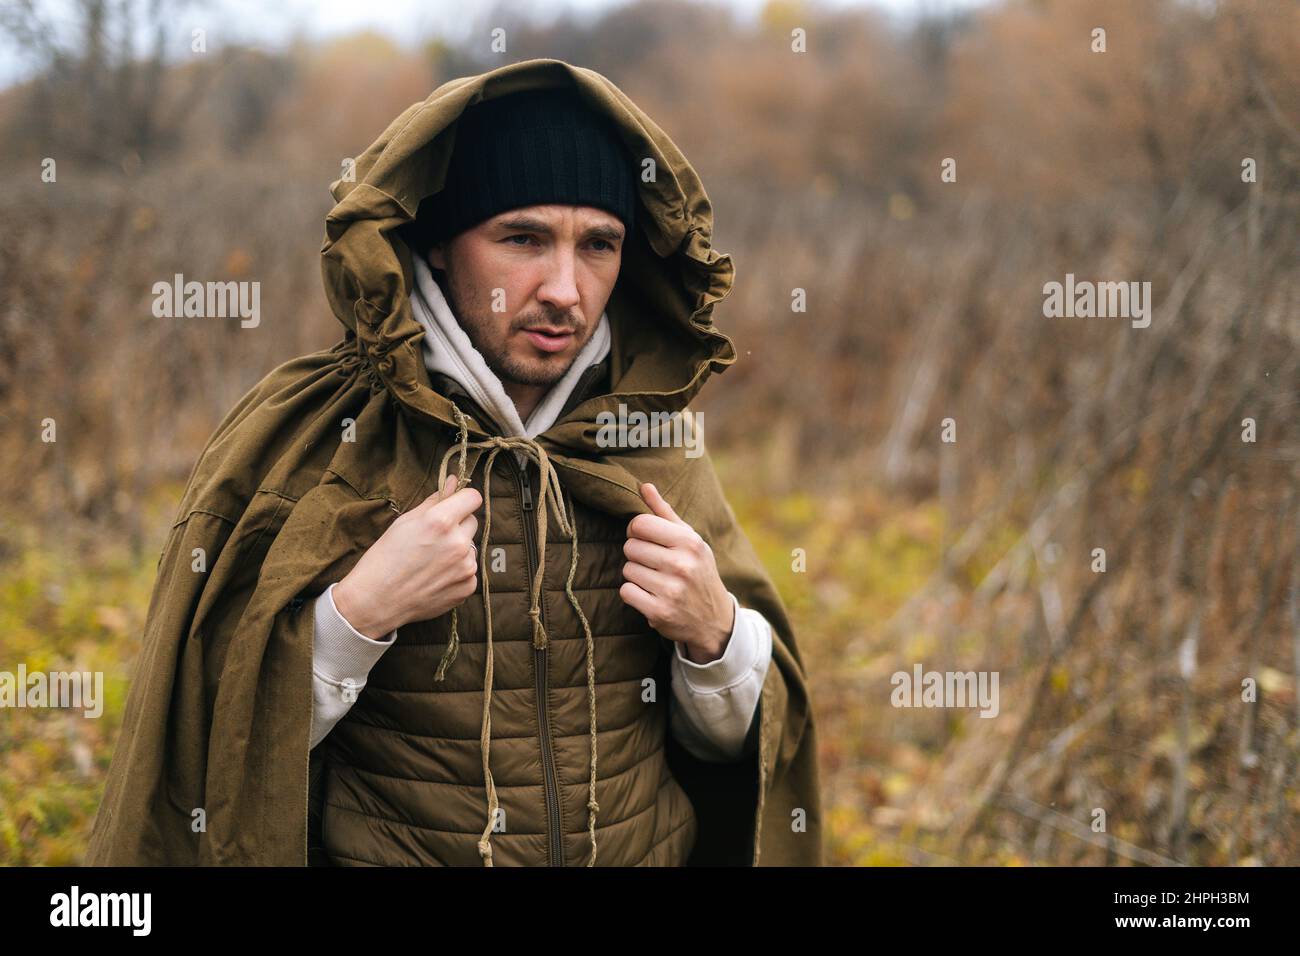 Portrait of thoughtful tourist man wearing green raincoat tent standing in thicket of bushes in cold overcast day and looking away. Stock Photo